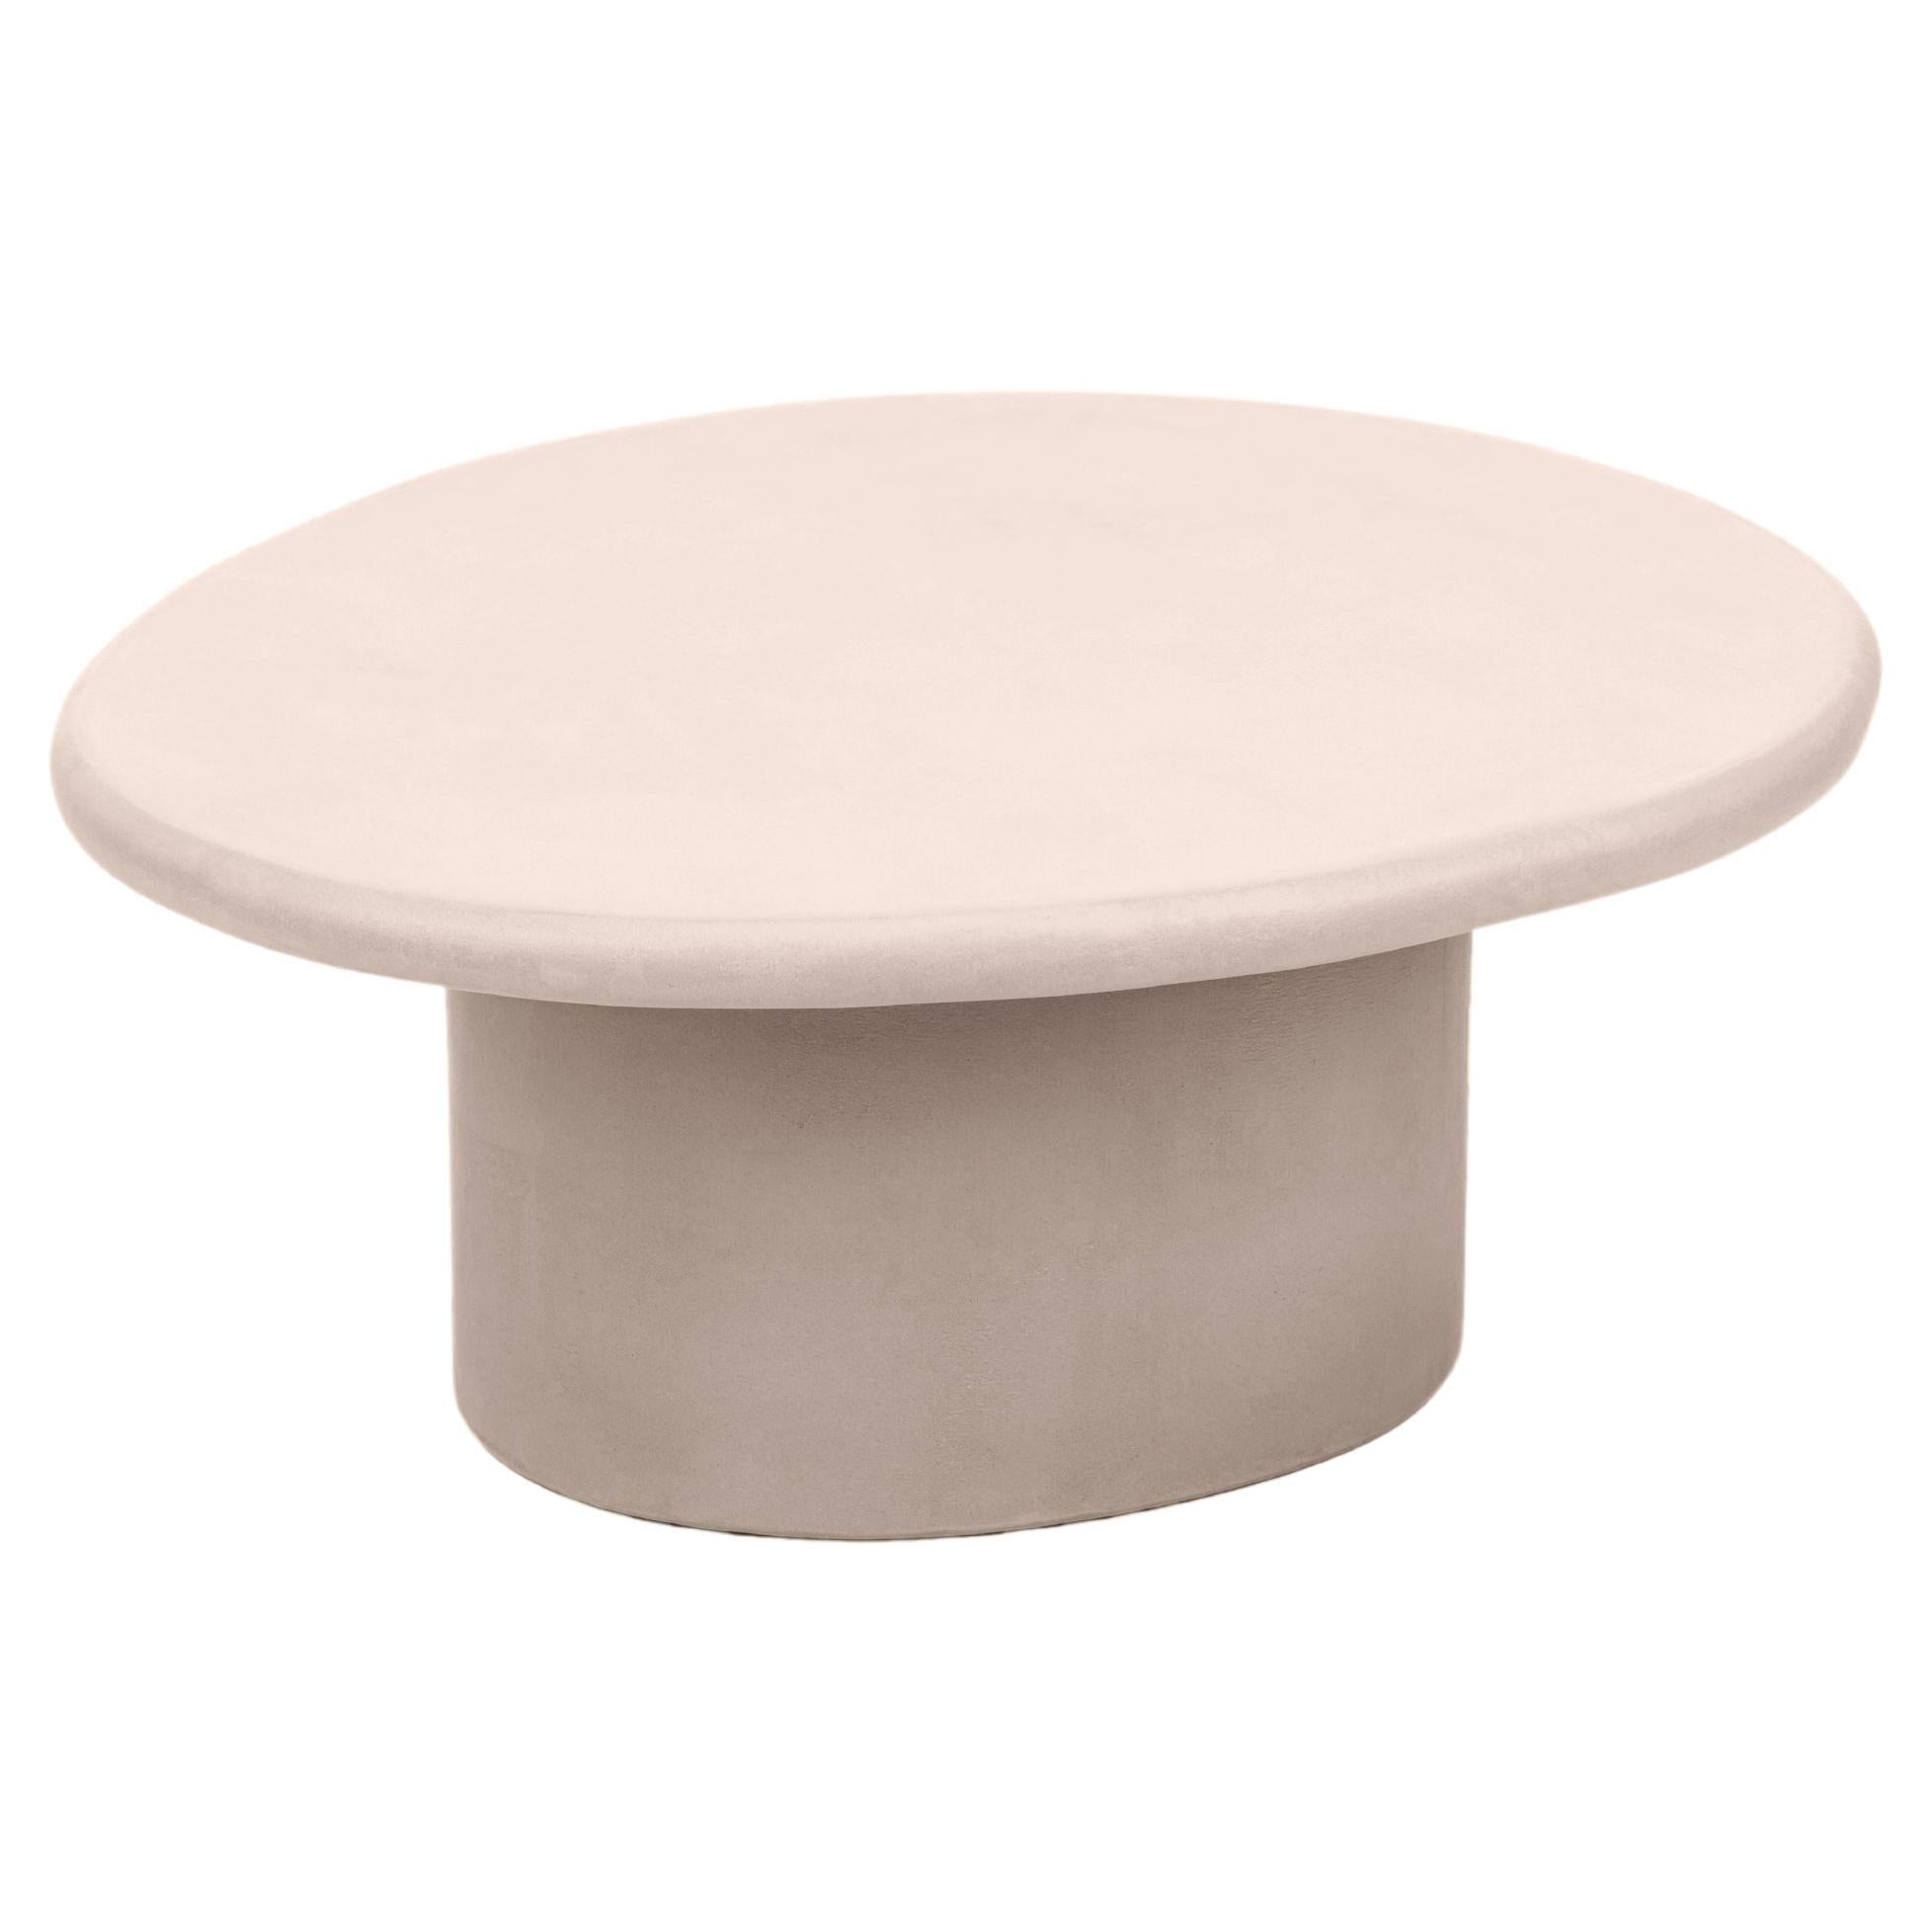 Natural Plaster Coffee Table "Sami" by Isabelle Beaumont